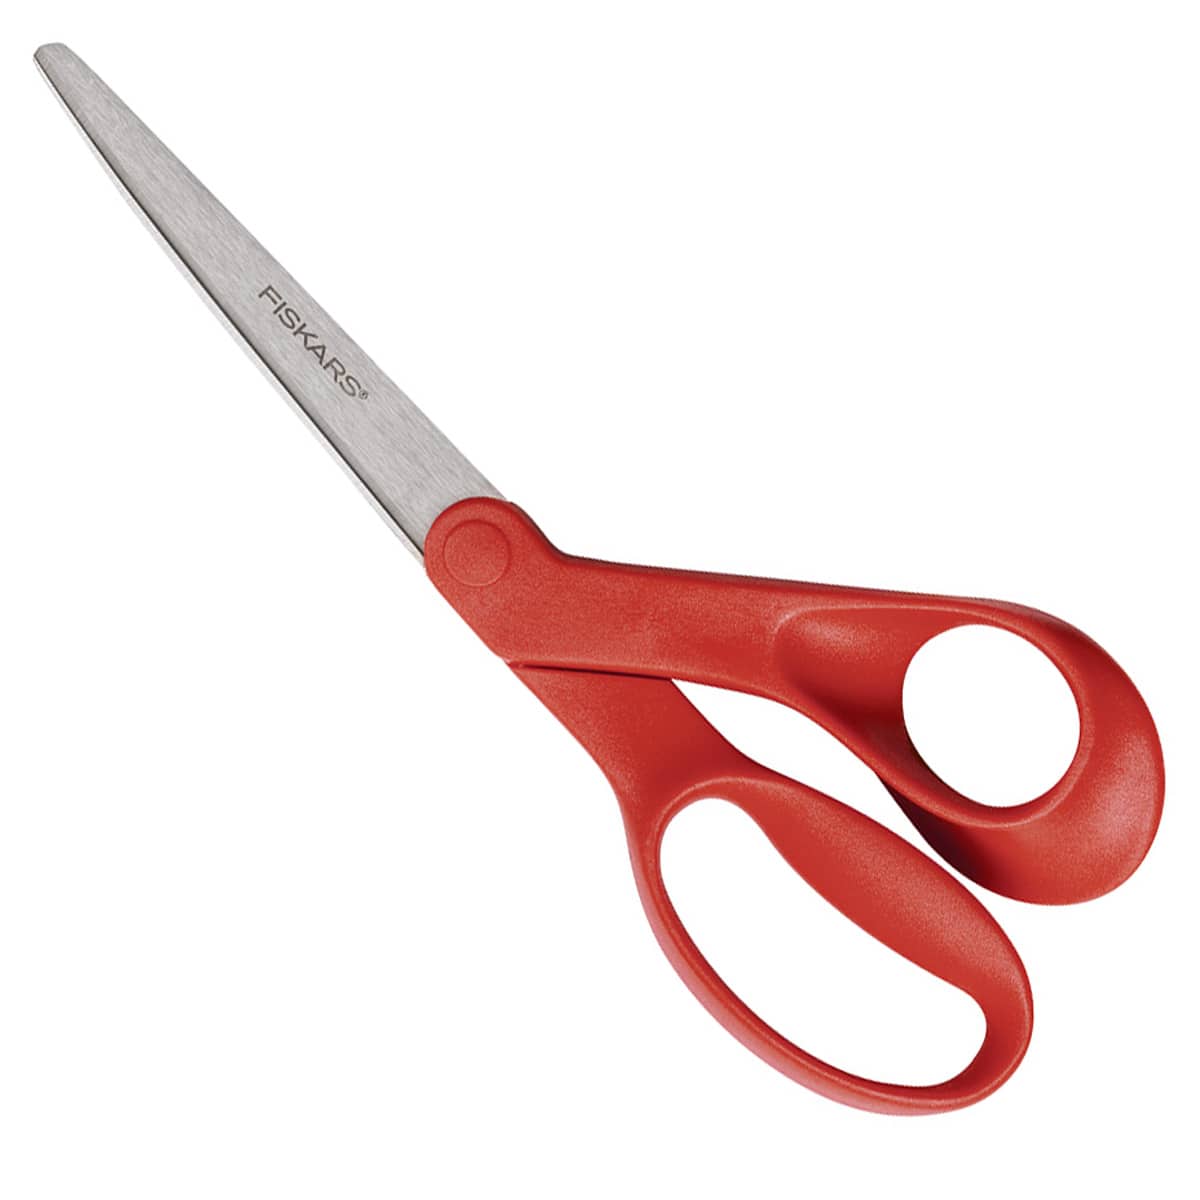 Lefty's Youth Sized True Left-Handed Scissors with Pointed Tips Pack of 2